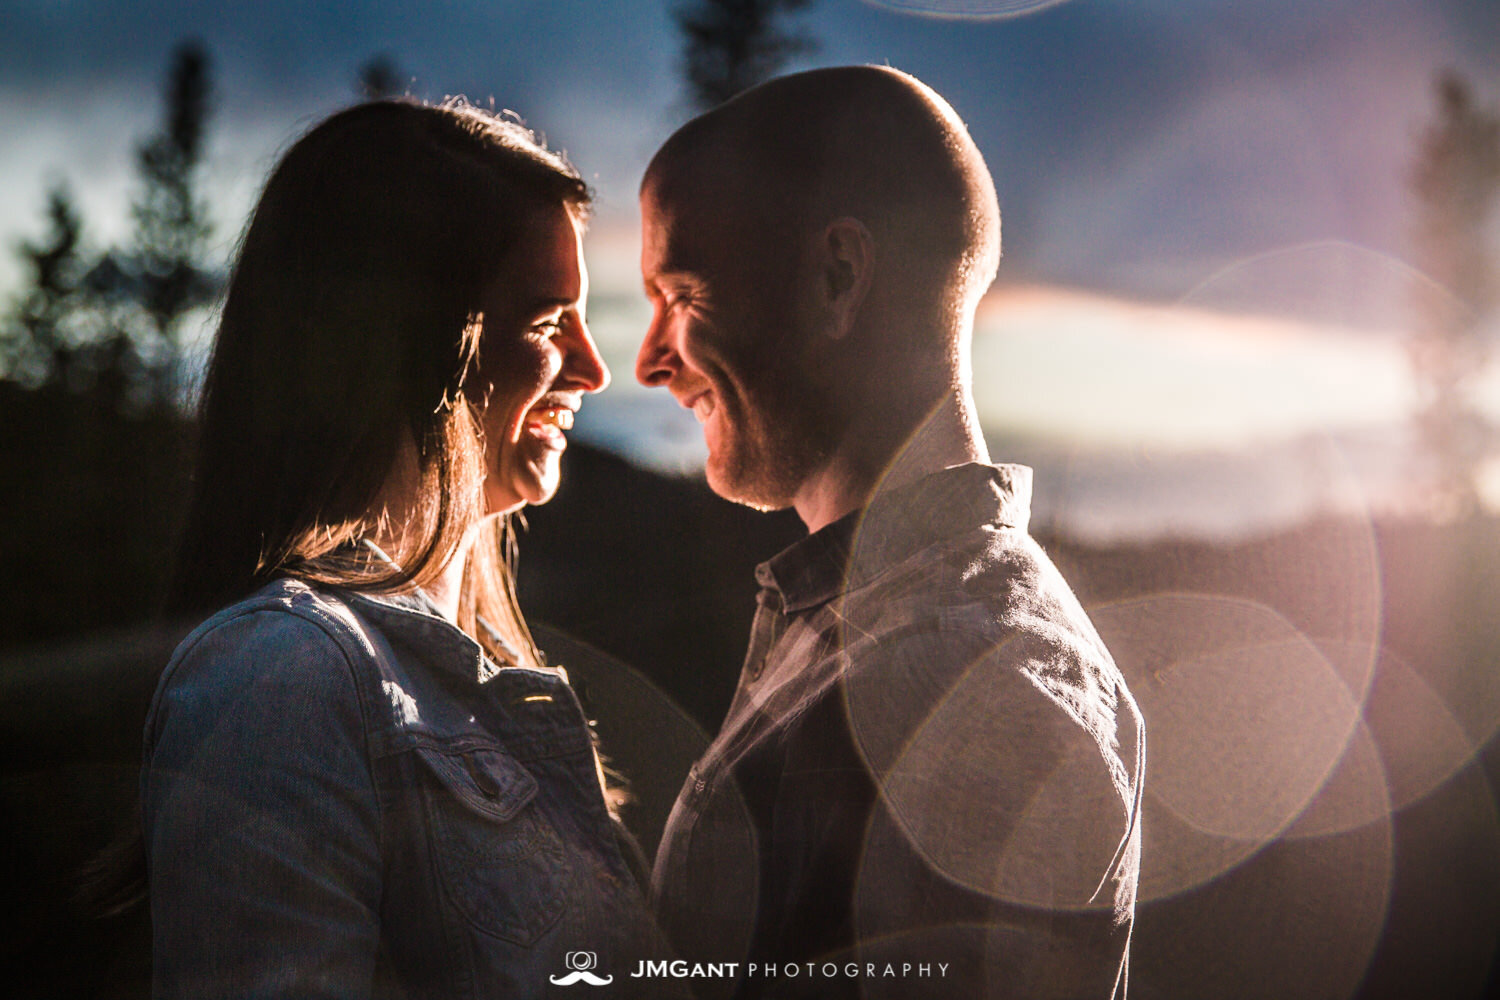  Vail Colorado Engagement Photography by JMGant Photography 